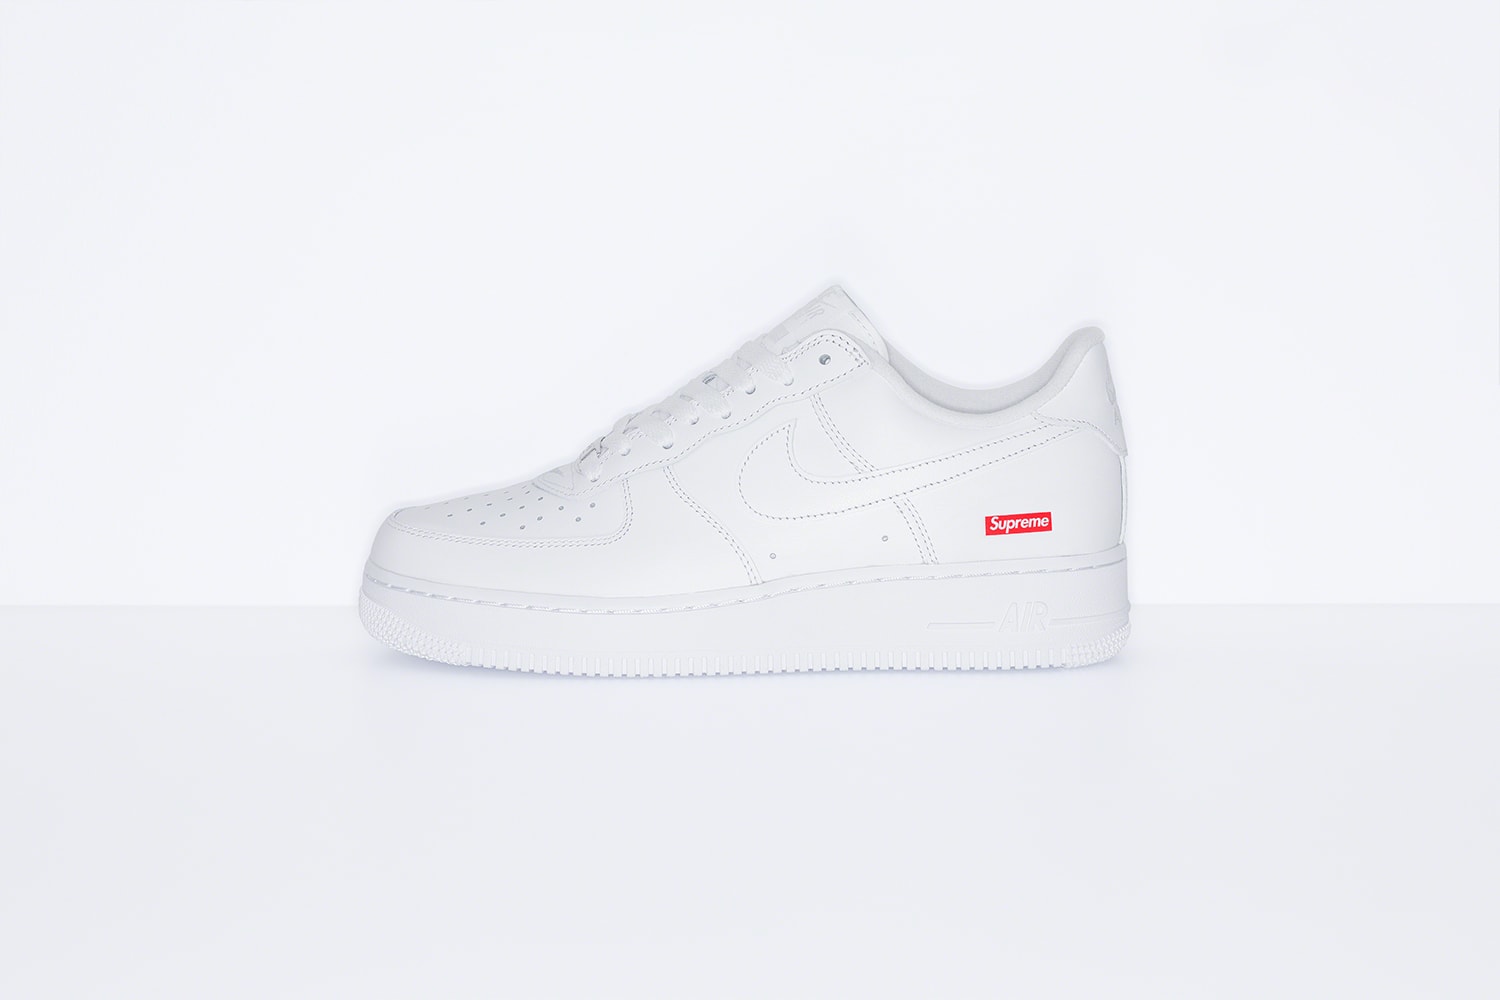 Supreme x Nike Air Force 1 Low Release Info Uptowns Shoes Sneakers footwear Kicks collaborations Box Logo Bogo 